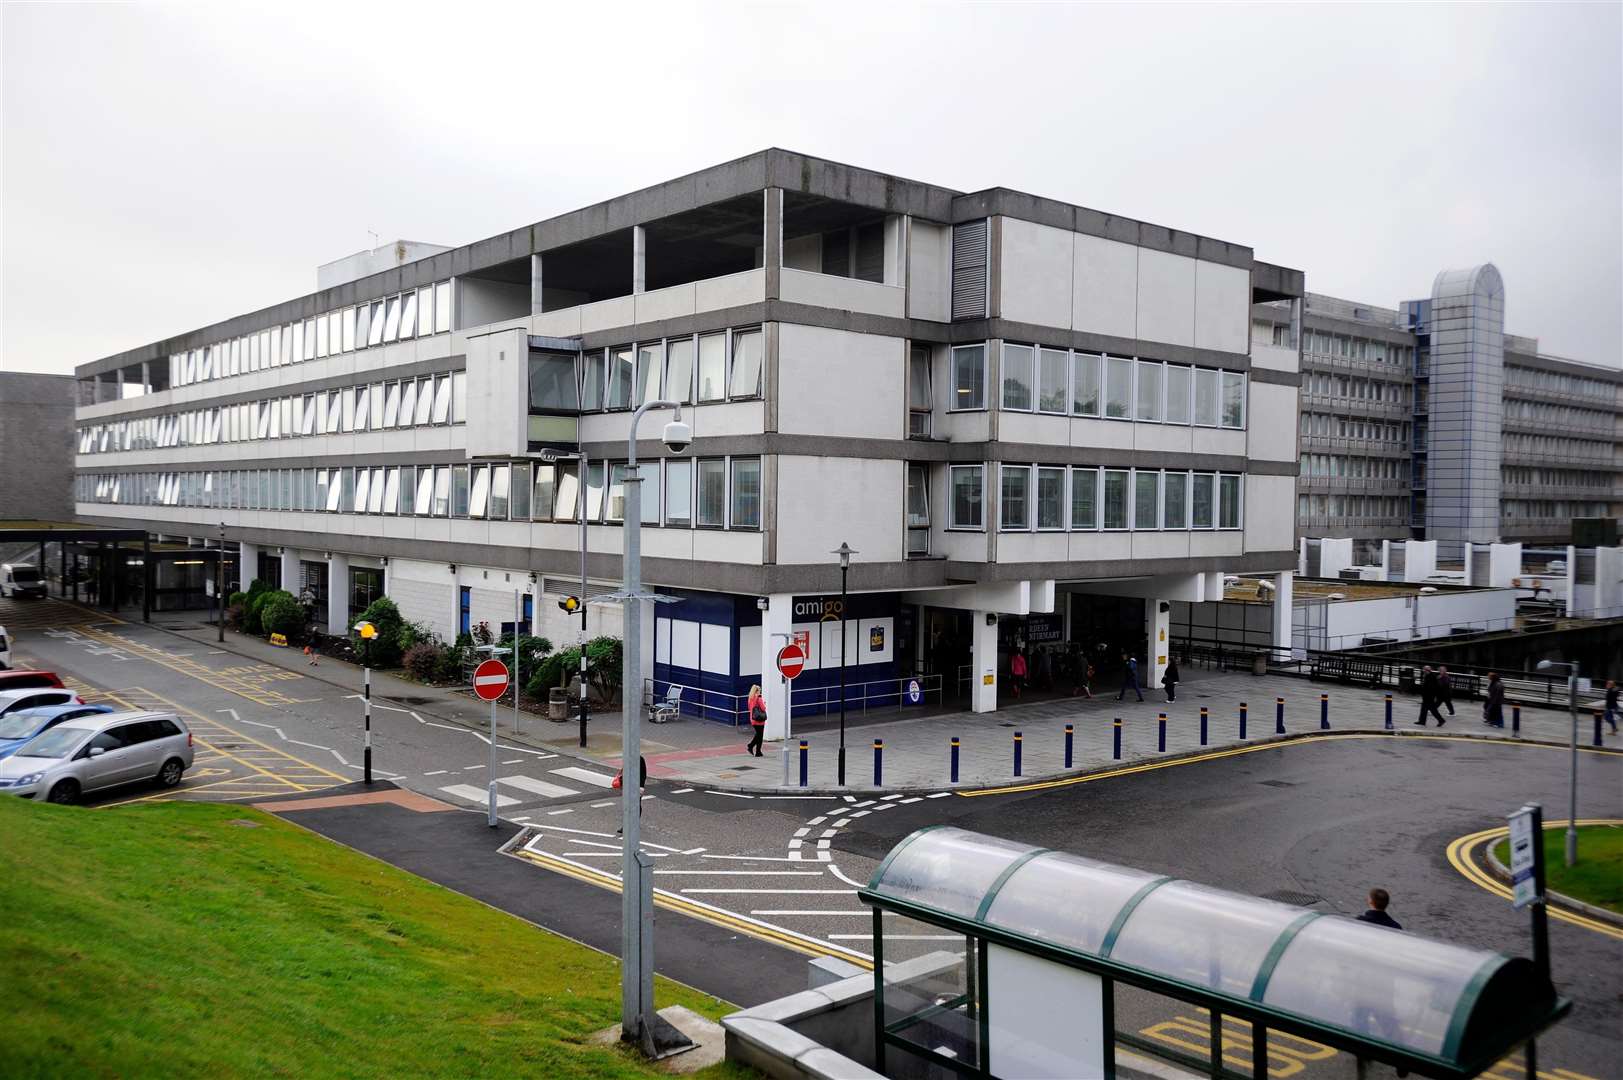 Aberdeen Royal Infirmary is facing admission issues